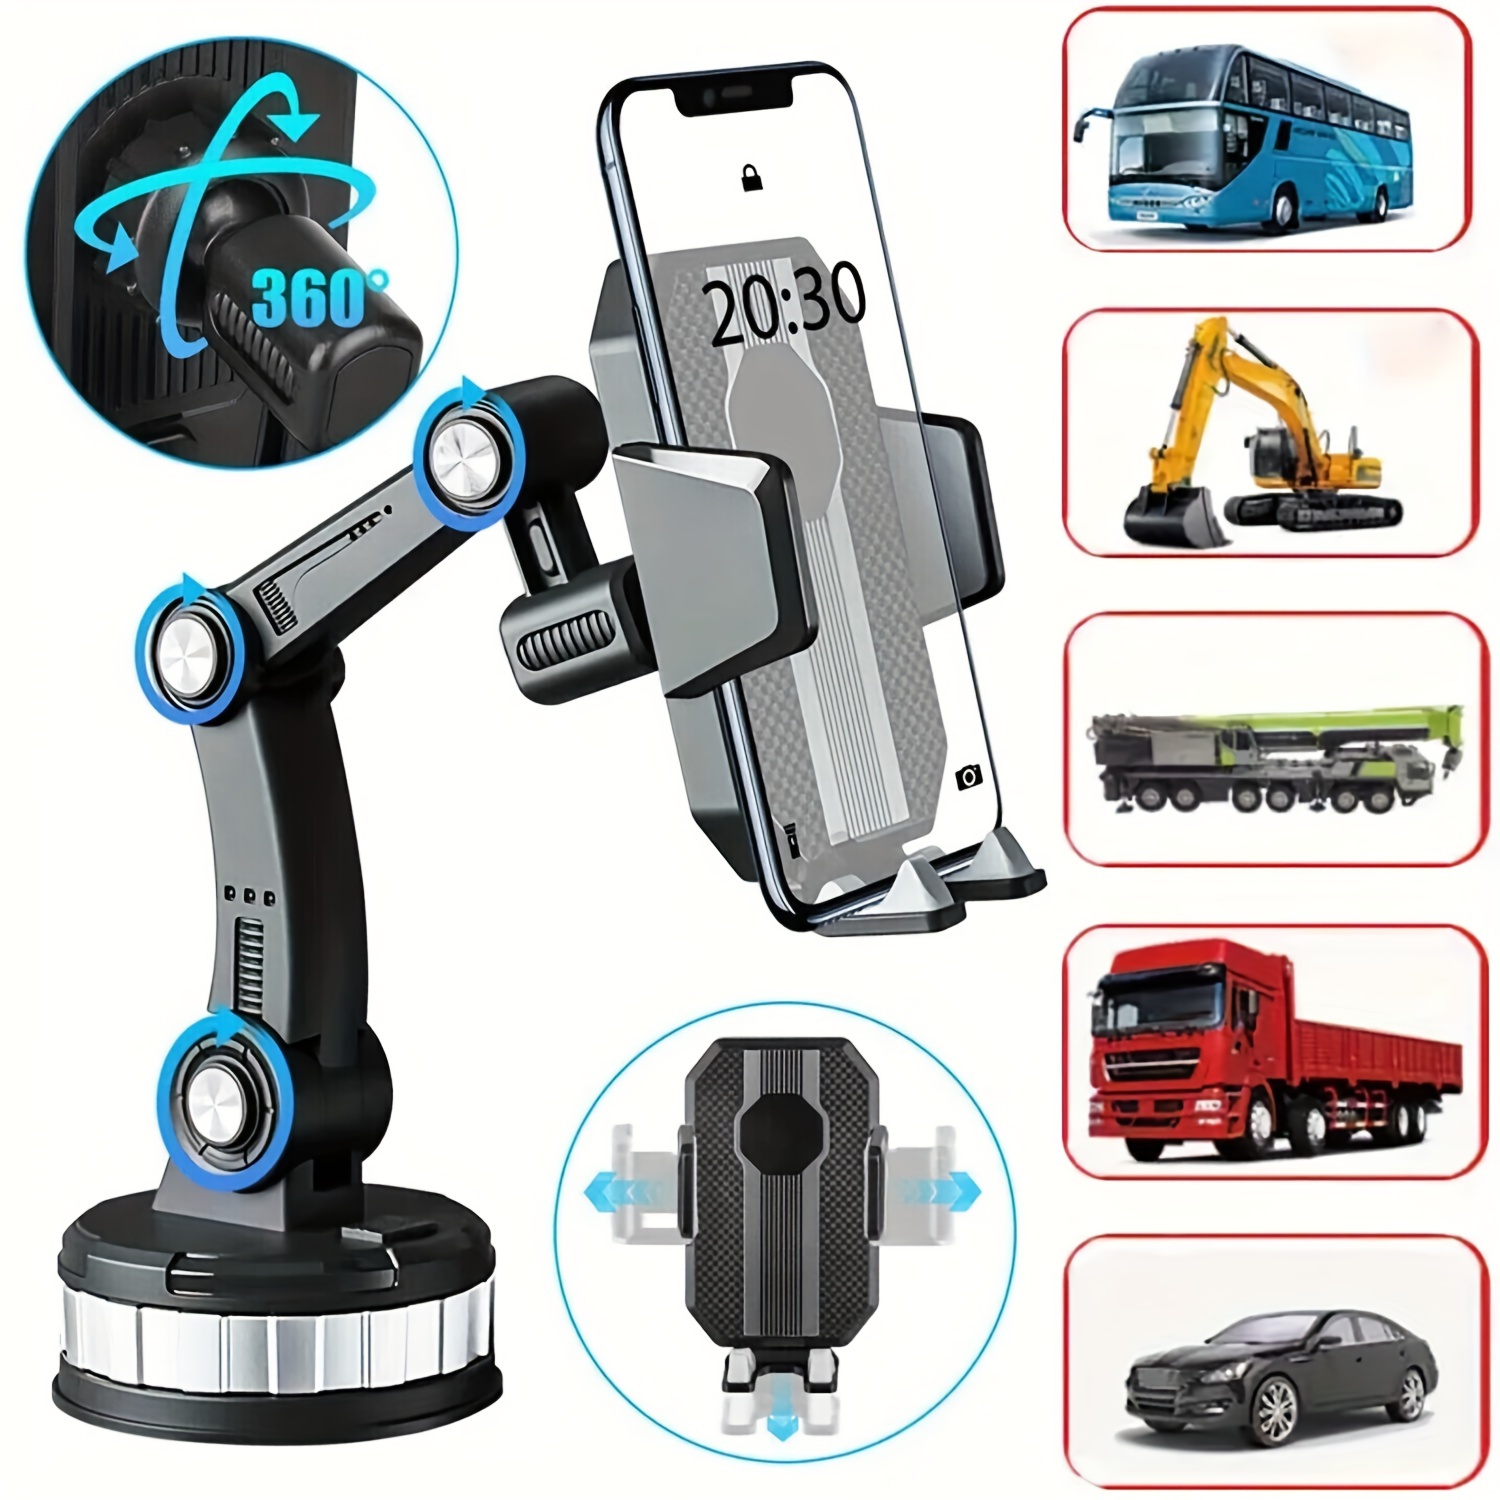 

1pc Multifunctional Mobile Phone Holder, Large Size 1st Generation Truck Bracket, 360 Retractable Rotary Adjustment Universal Car Phone Bracket, For Car, Truck, Engineering Vehicles